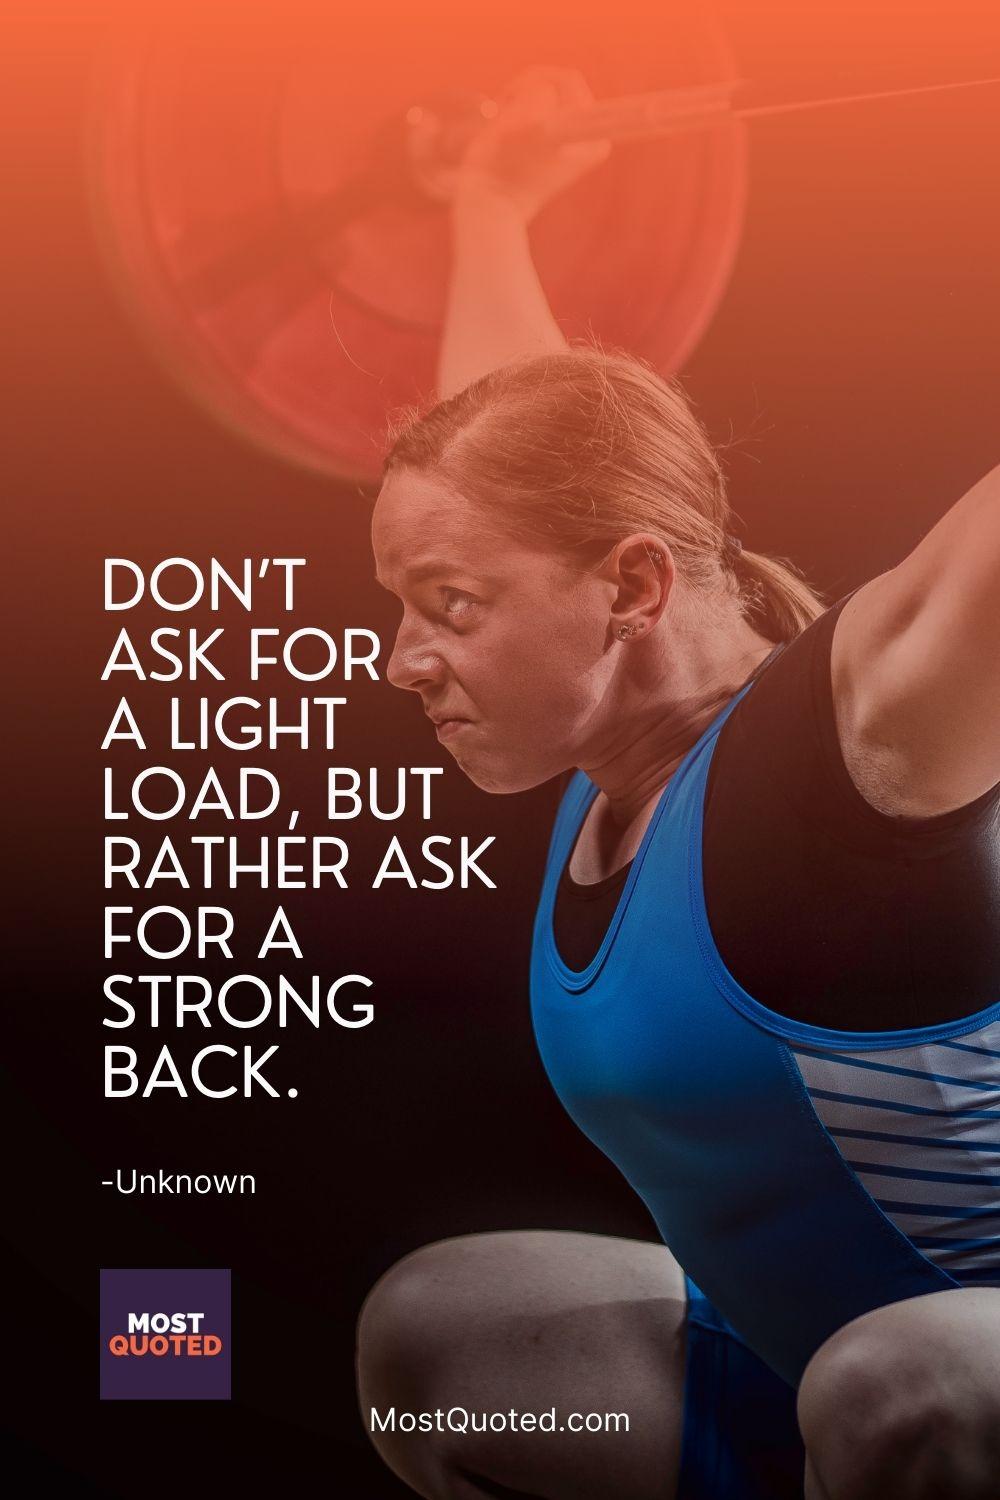 Don’t ask for a light load, but rather ask for a strong back.